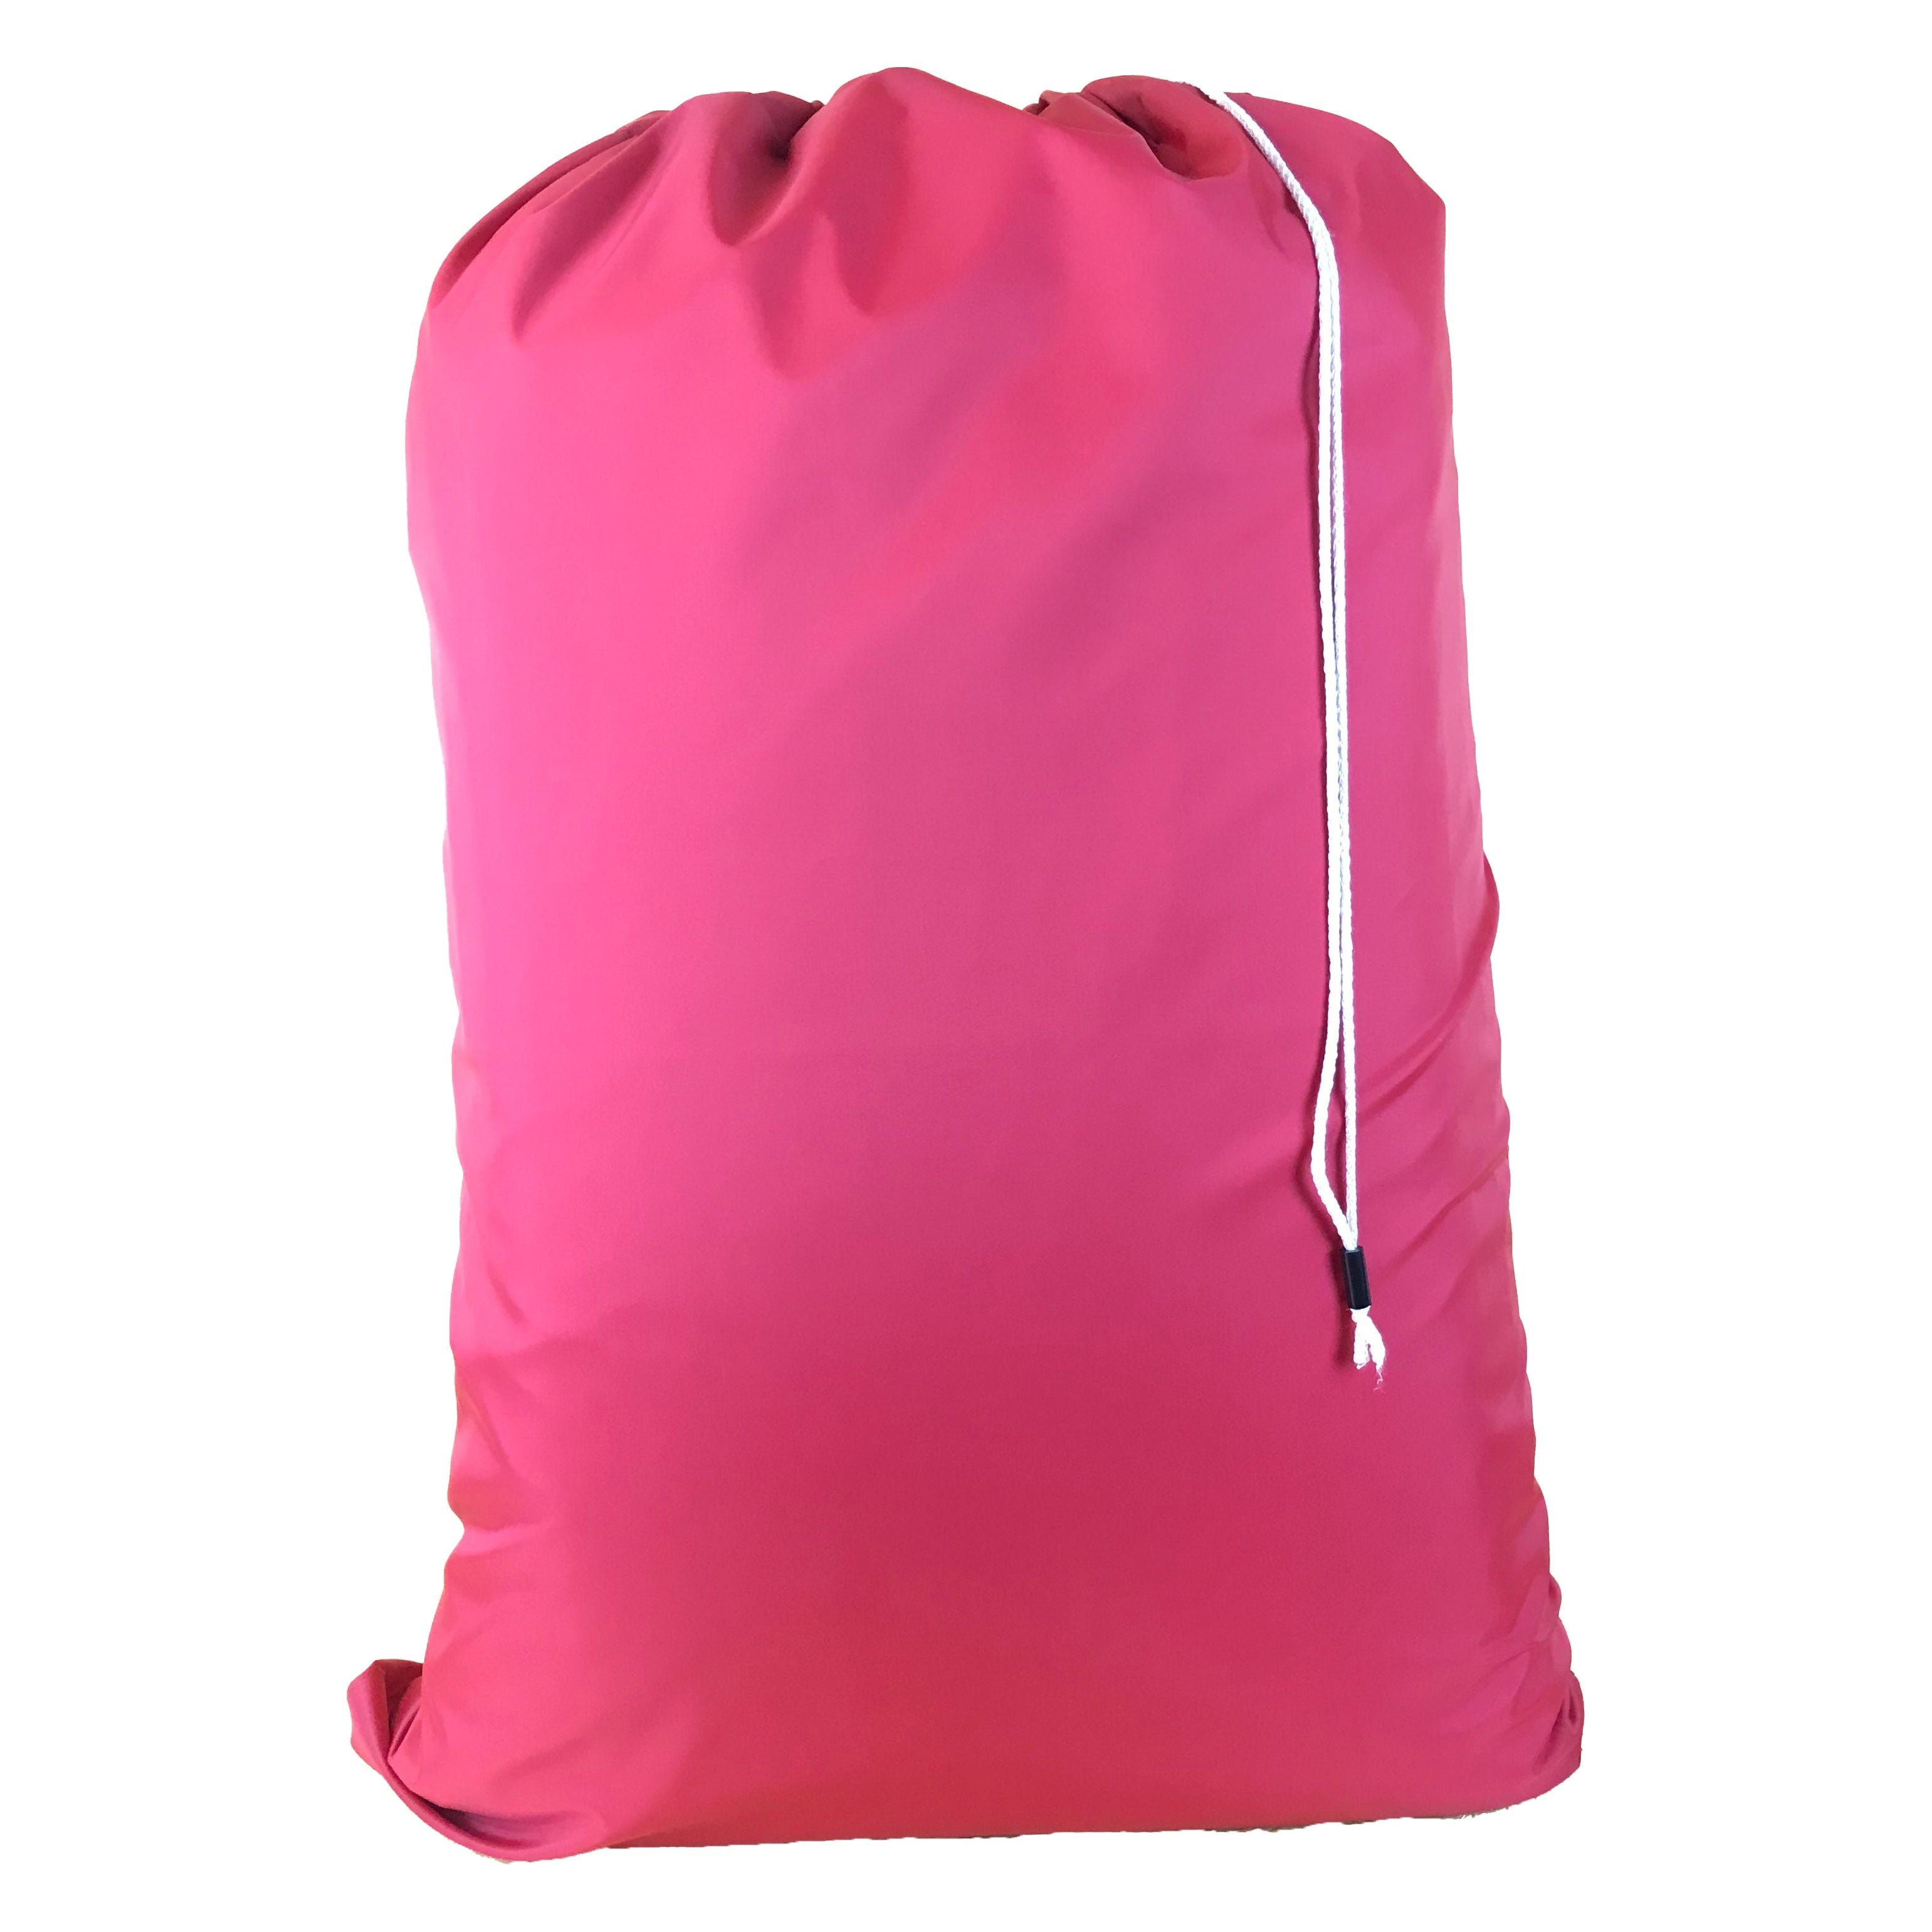 30 x 40 Heavy (210 Denier) Nylon Bags, Color Red, 50 pcs/box, Sold by the  Box, Price for 1 bag - $3.95 each bag